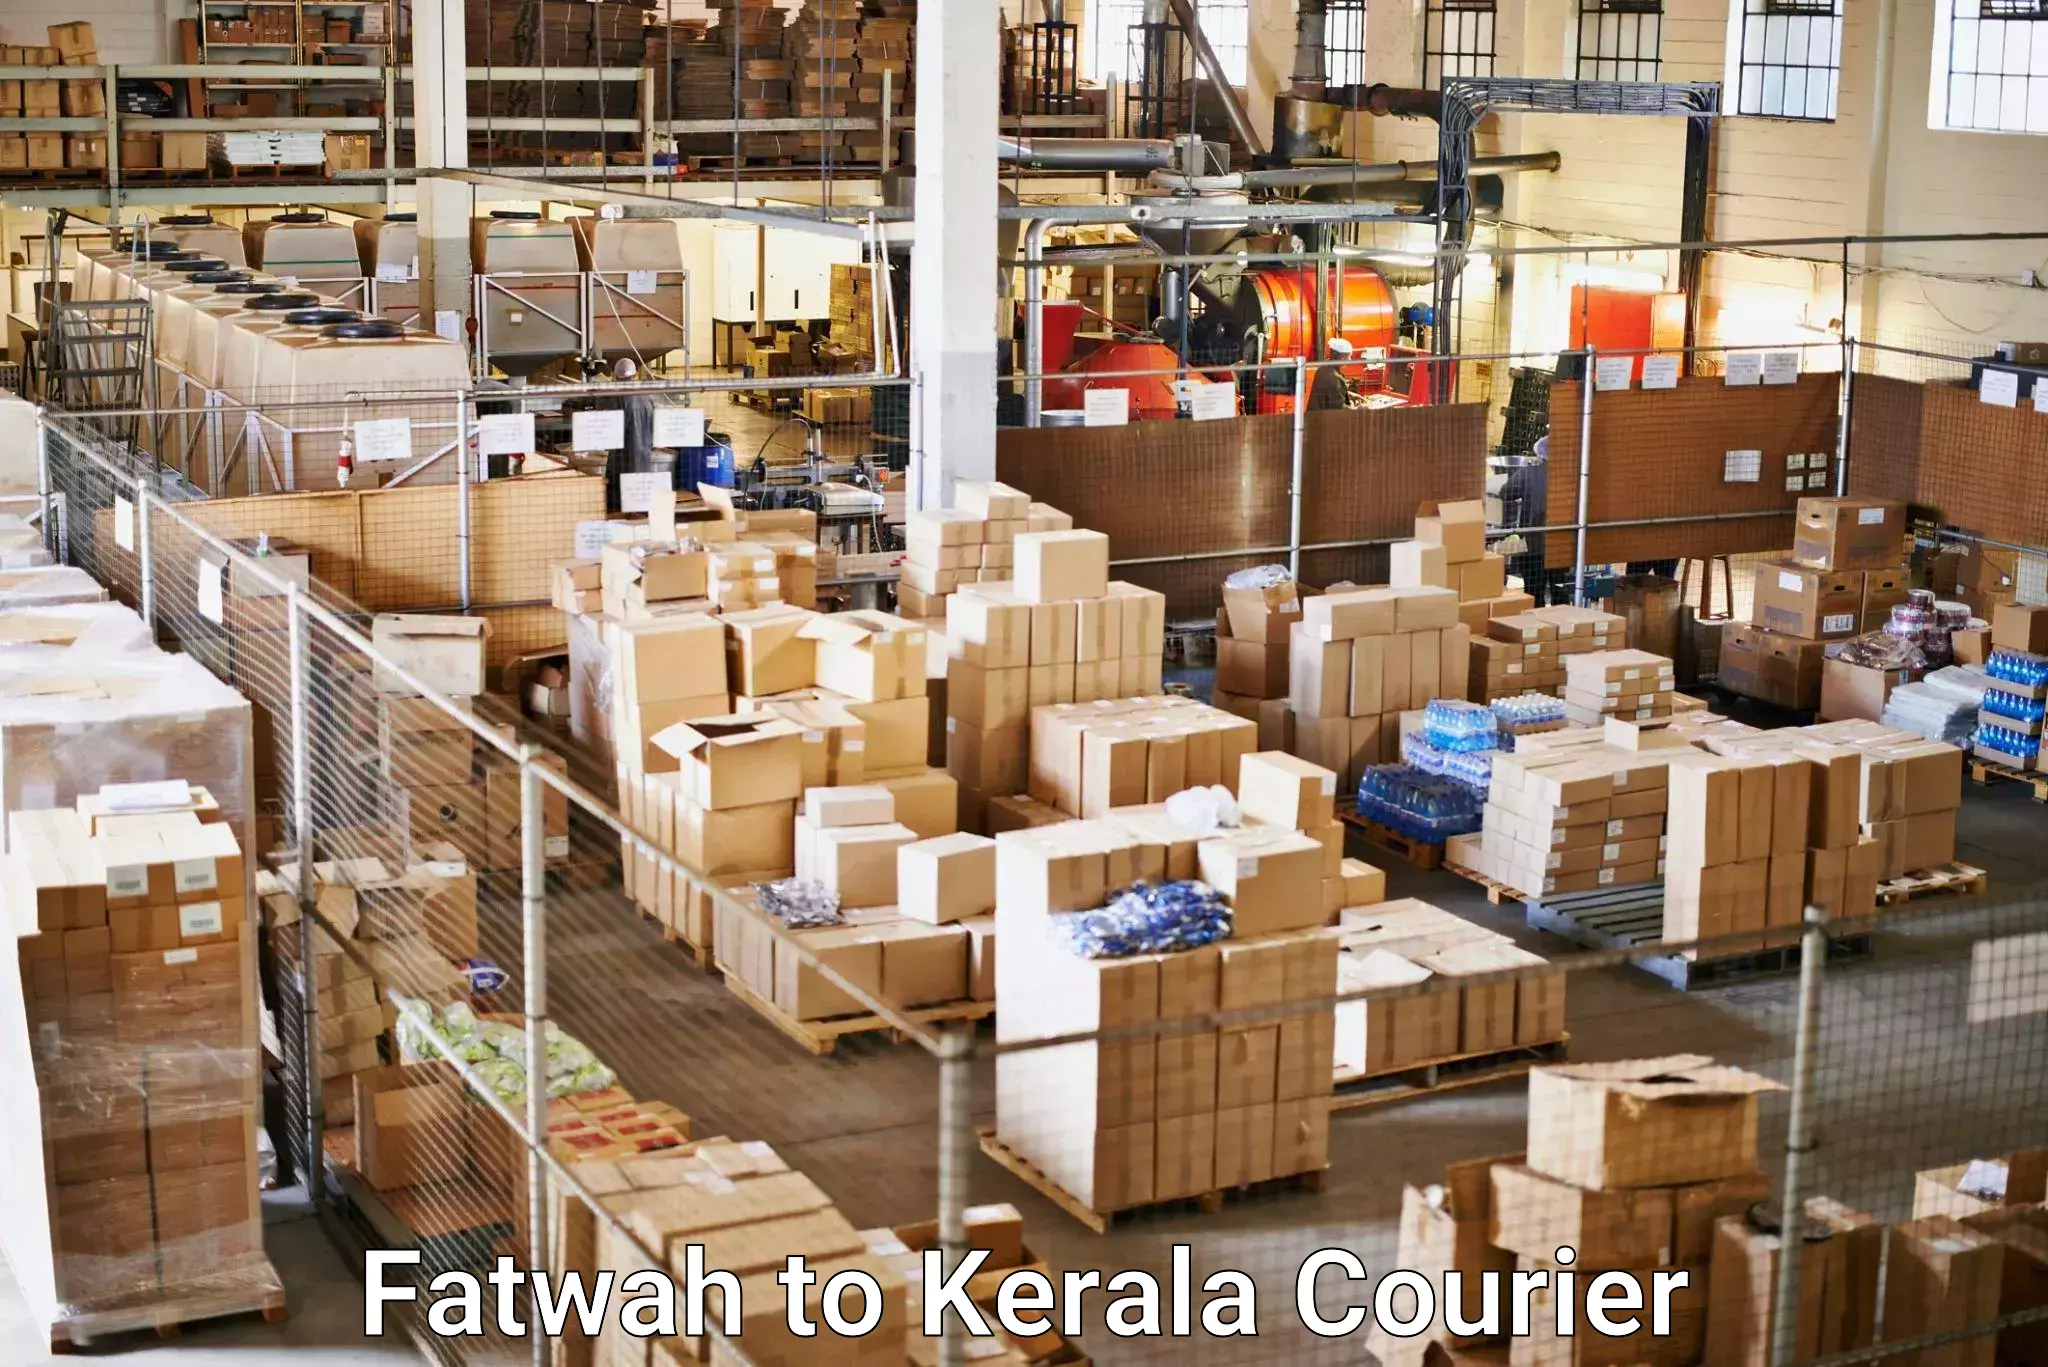 Subscription-based courier Fatwah to Kerala